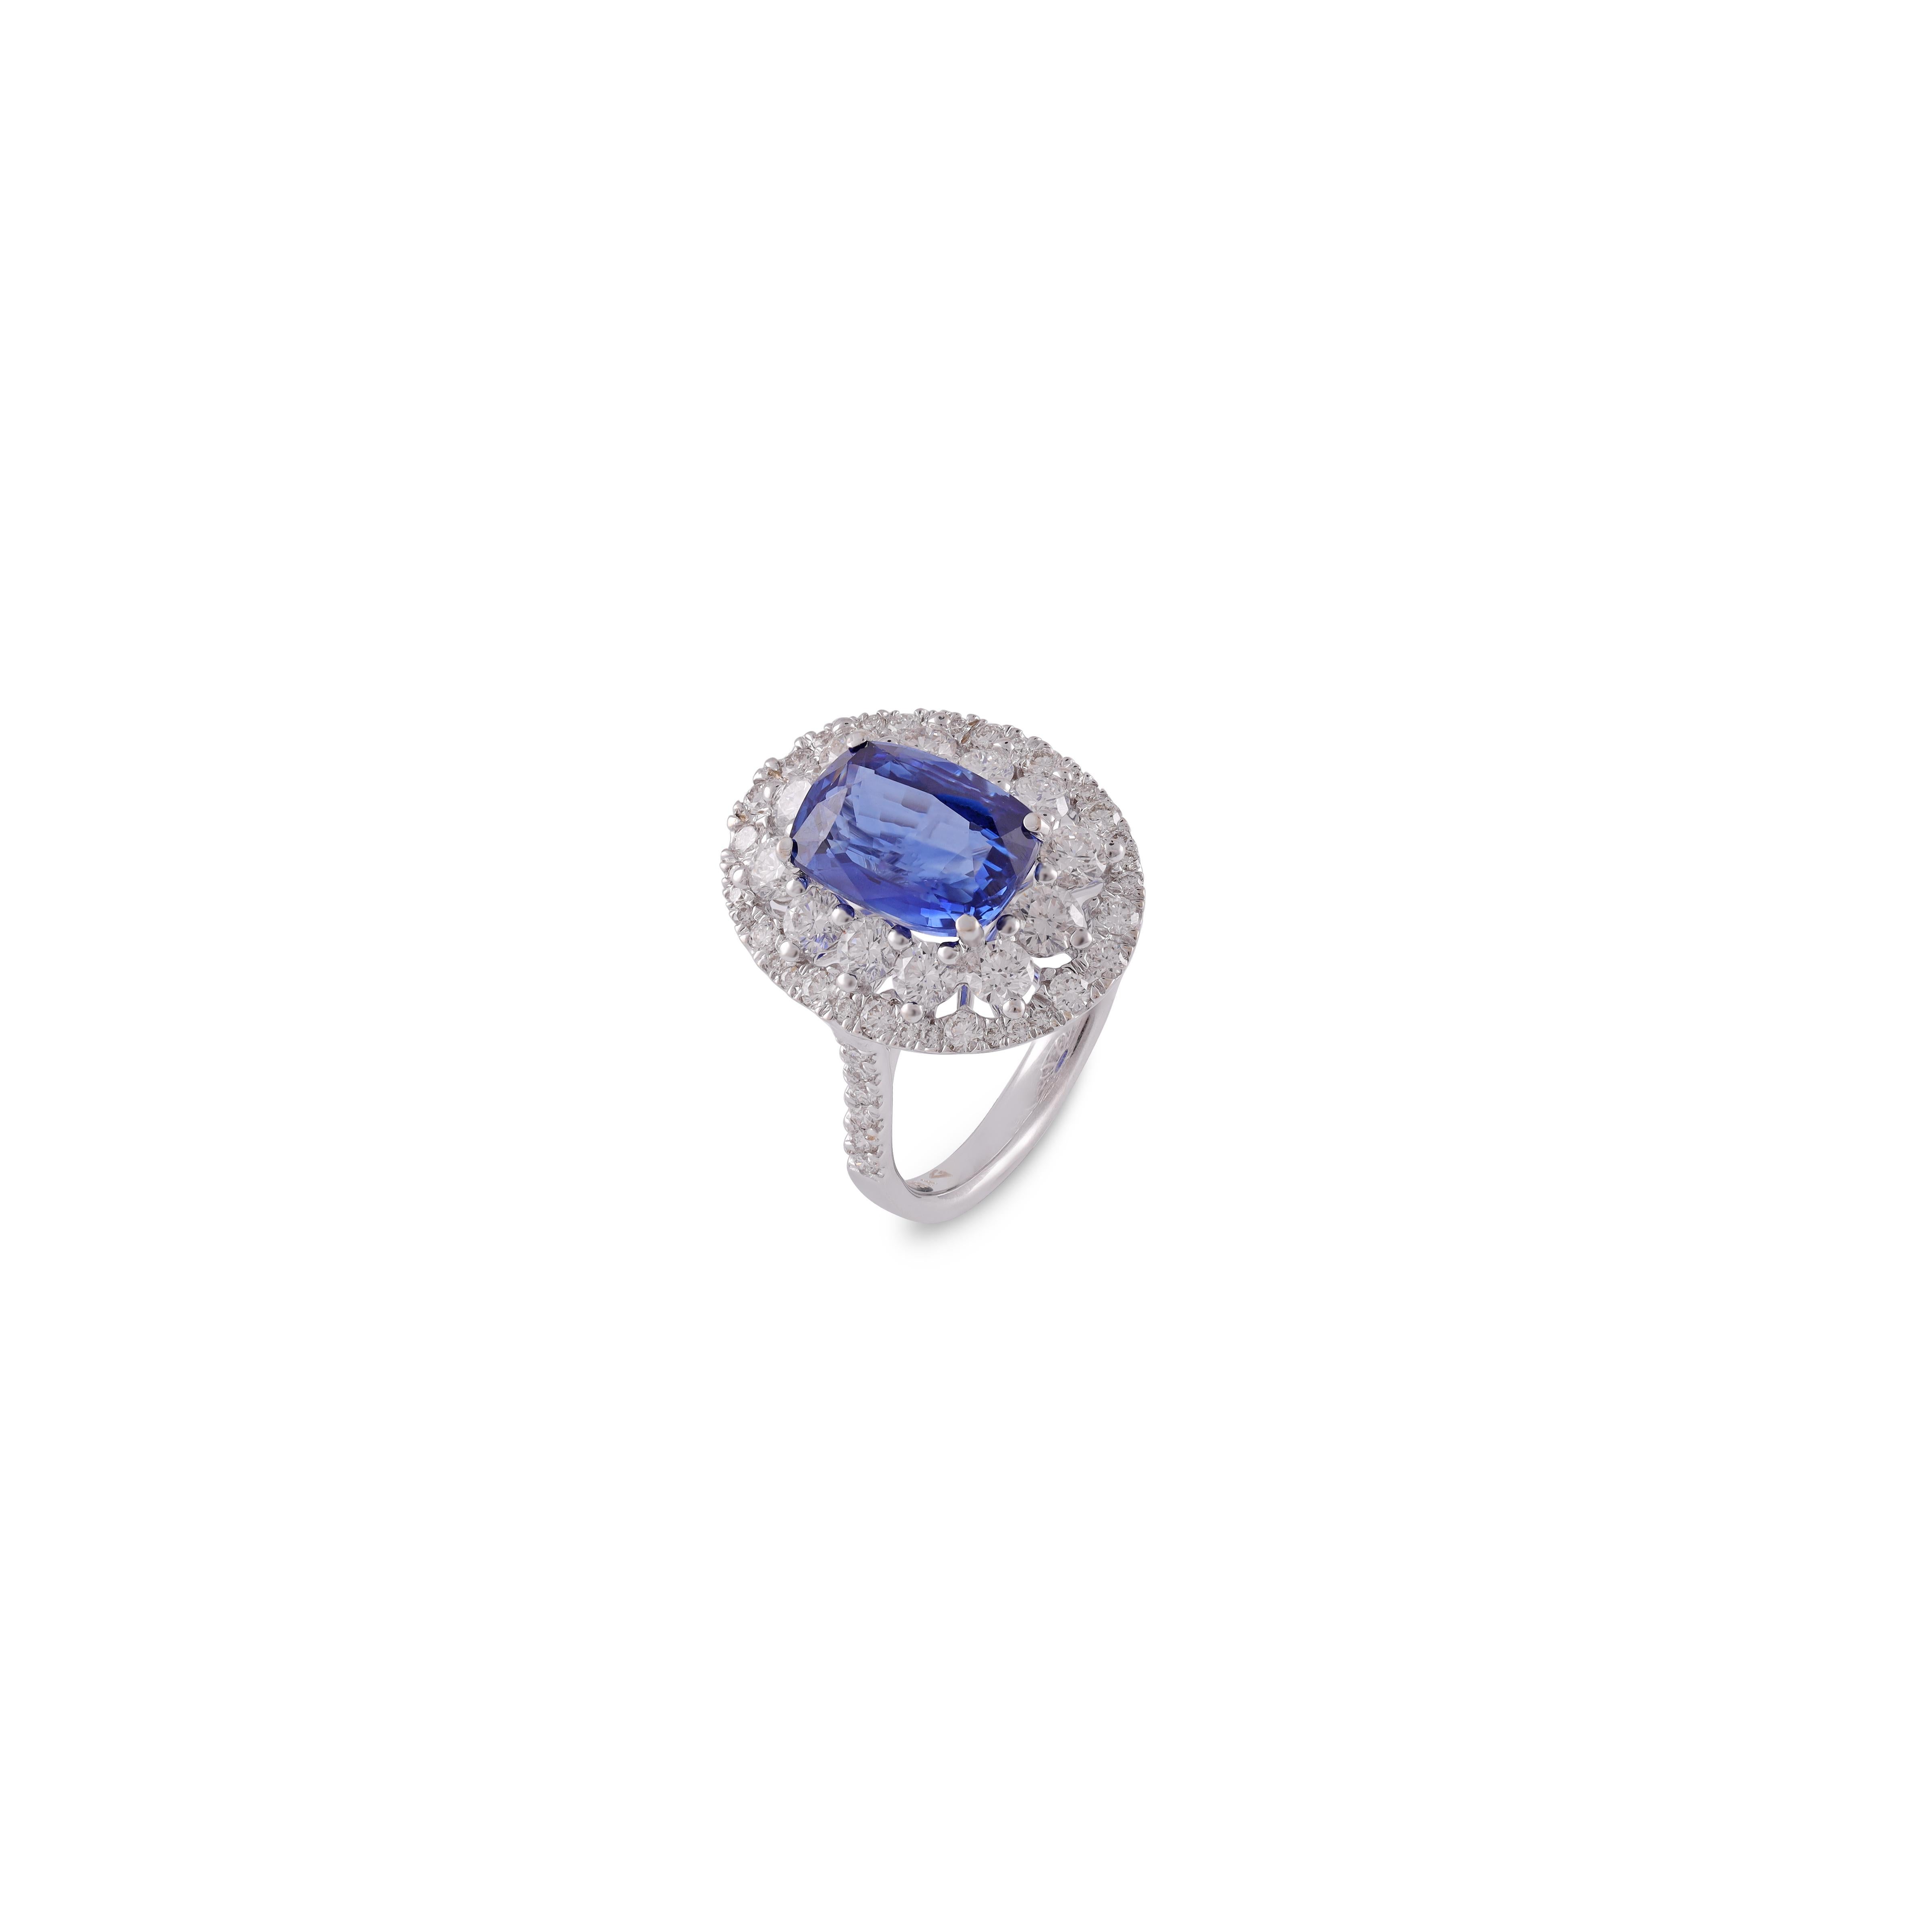 Cushion Cut 3.97 Cts High Value Clear Blue Sapphire & Diamond Cluster Ring in 18k White Gold